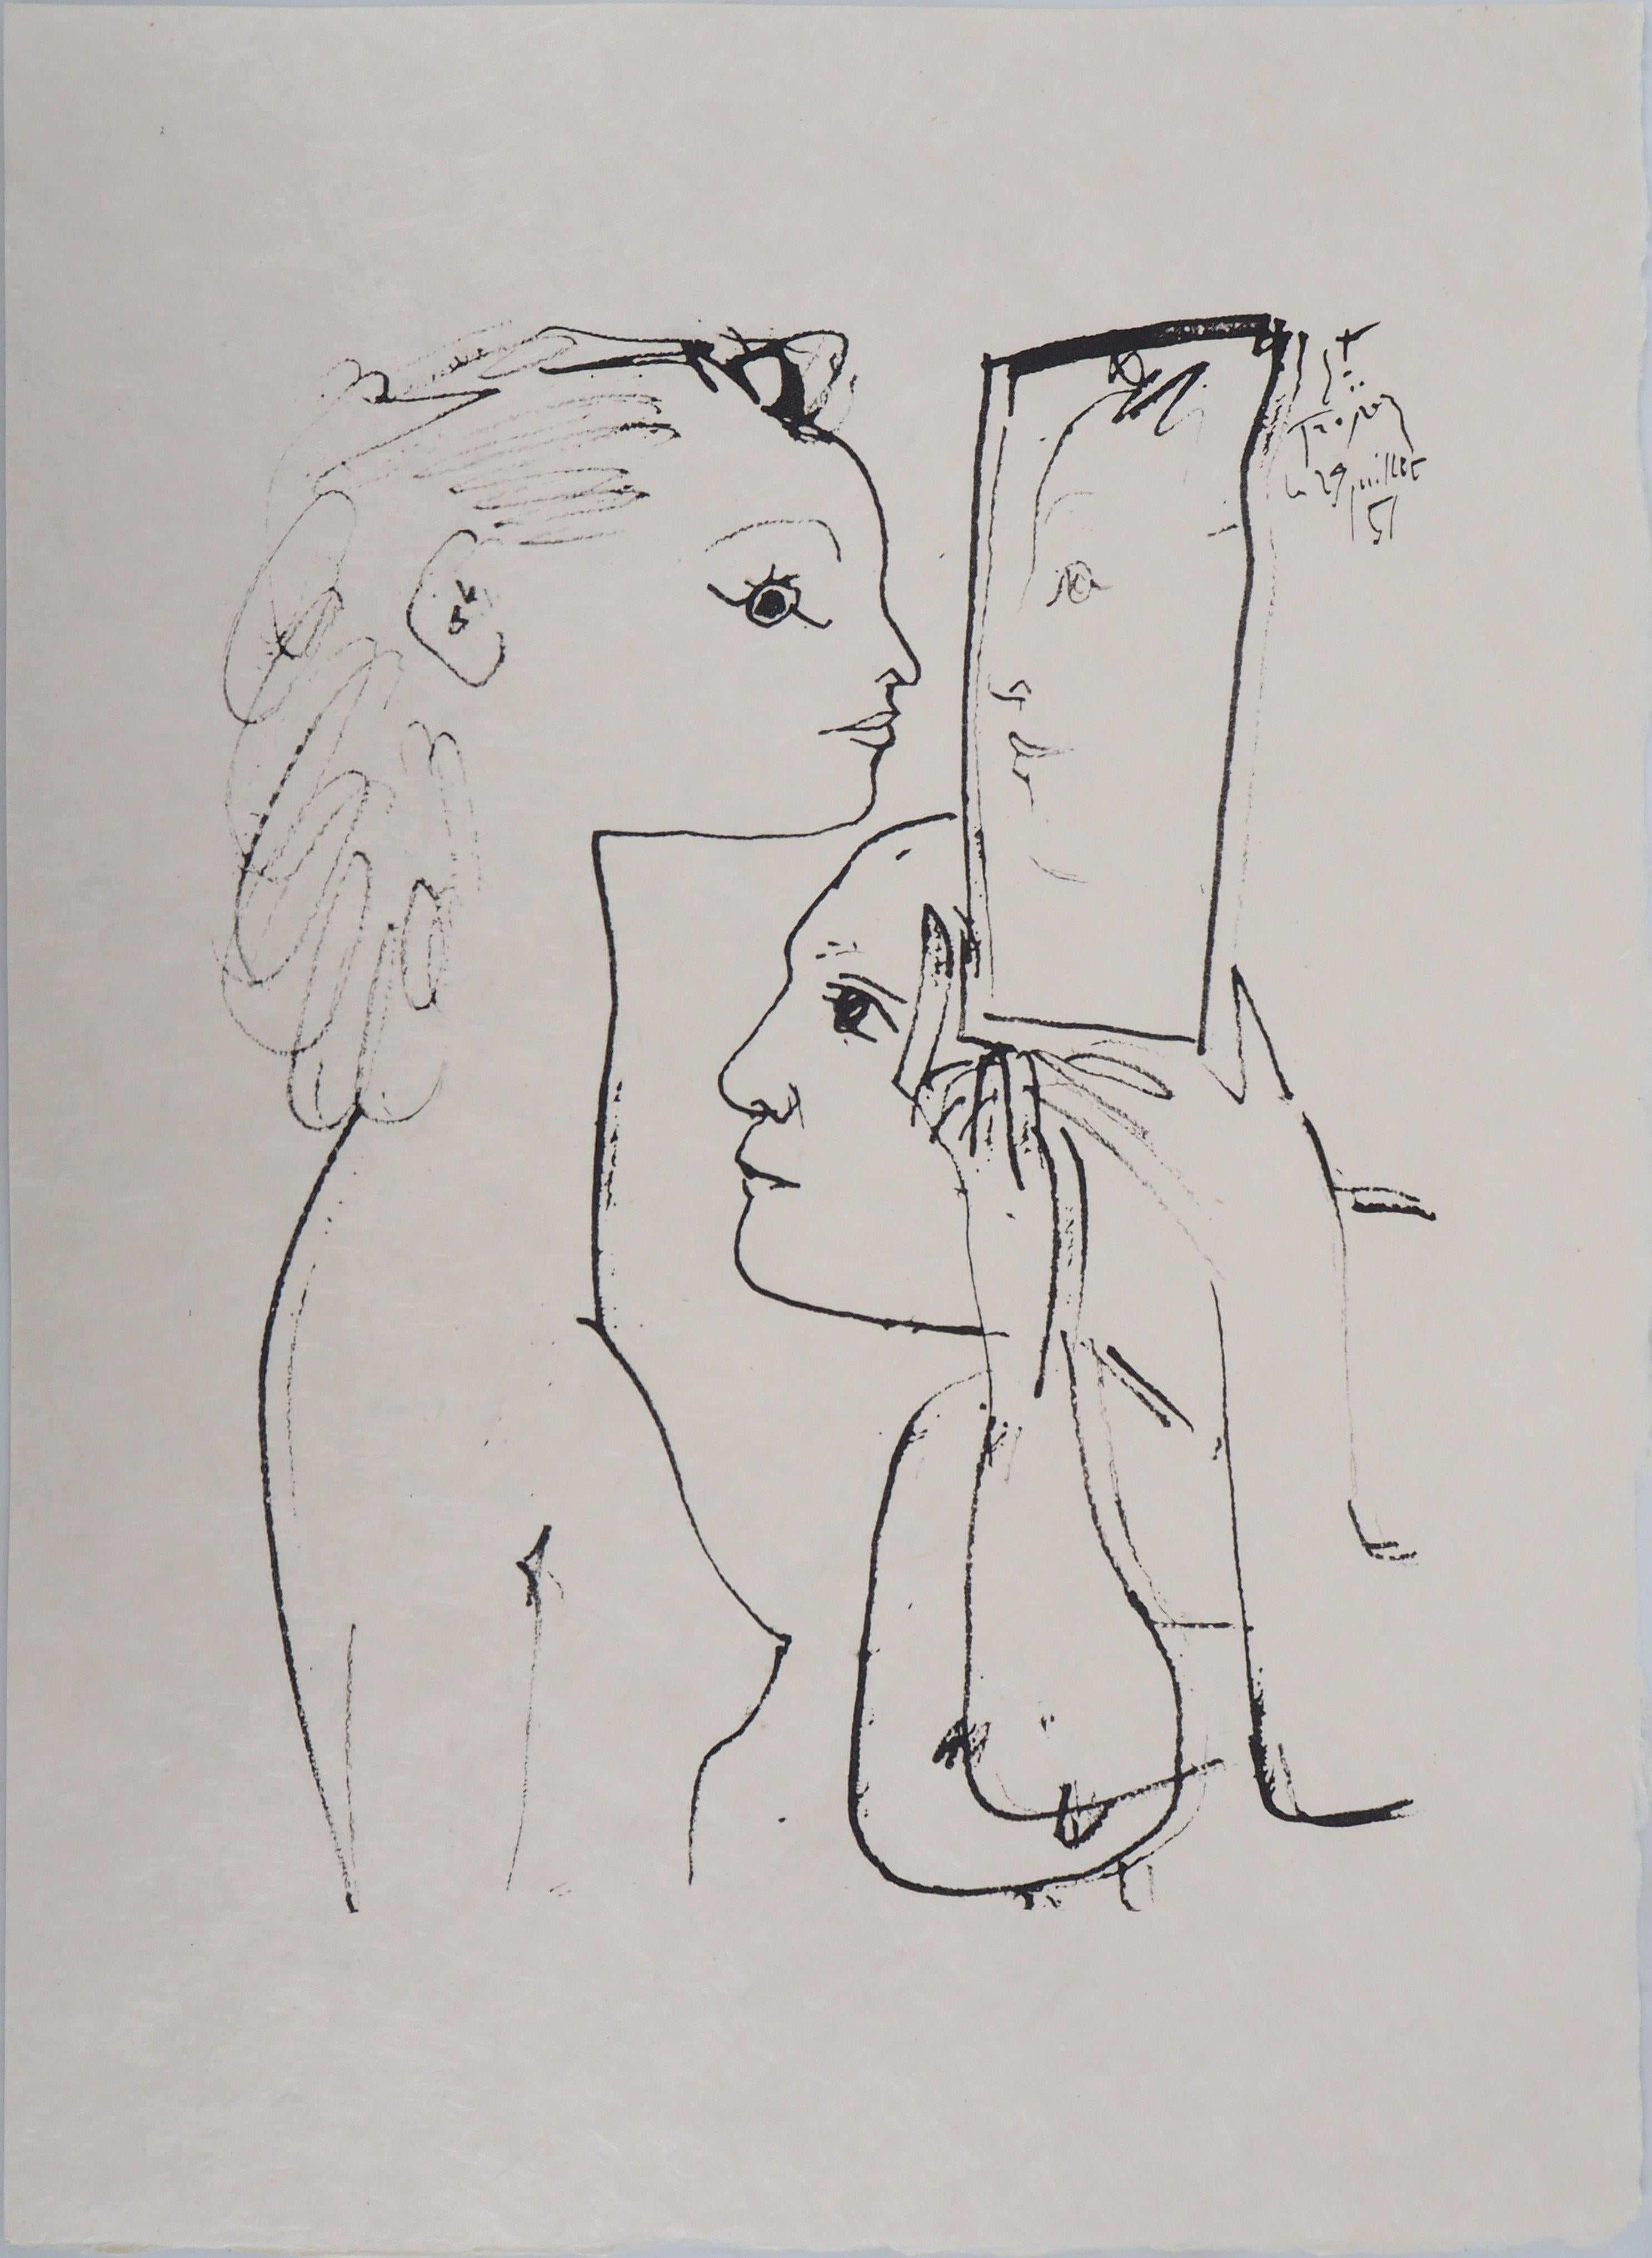 Picasso and Model Looking In The Mirror - Lithograph on Japan paper - Ltd 100 - Print by (after) Pablo Picasso